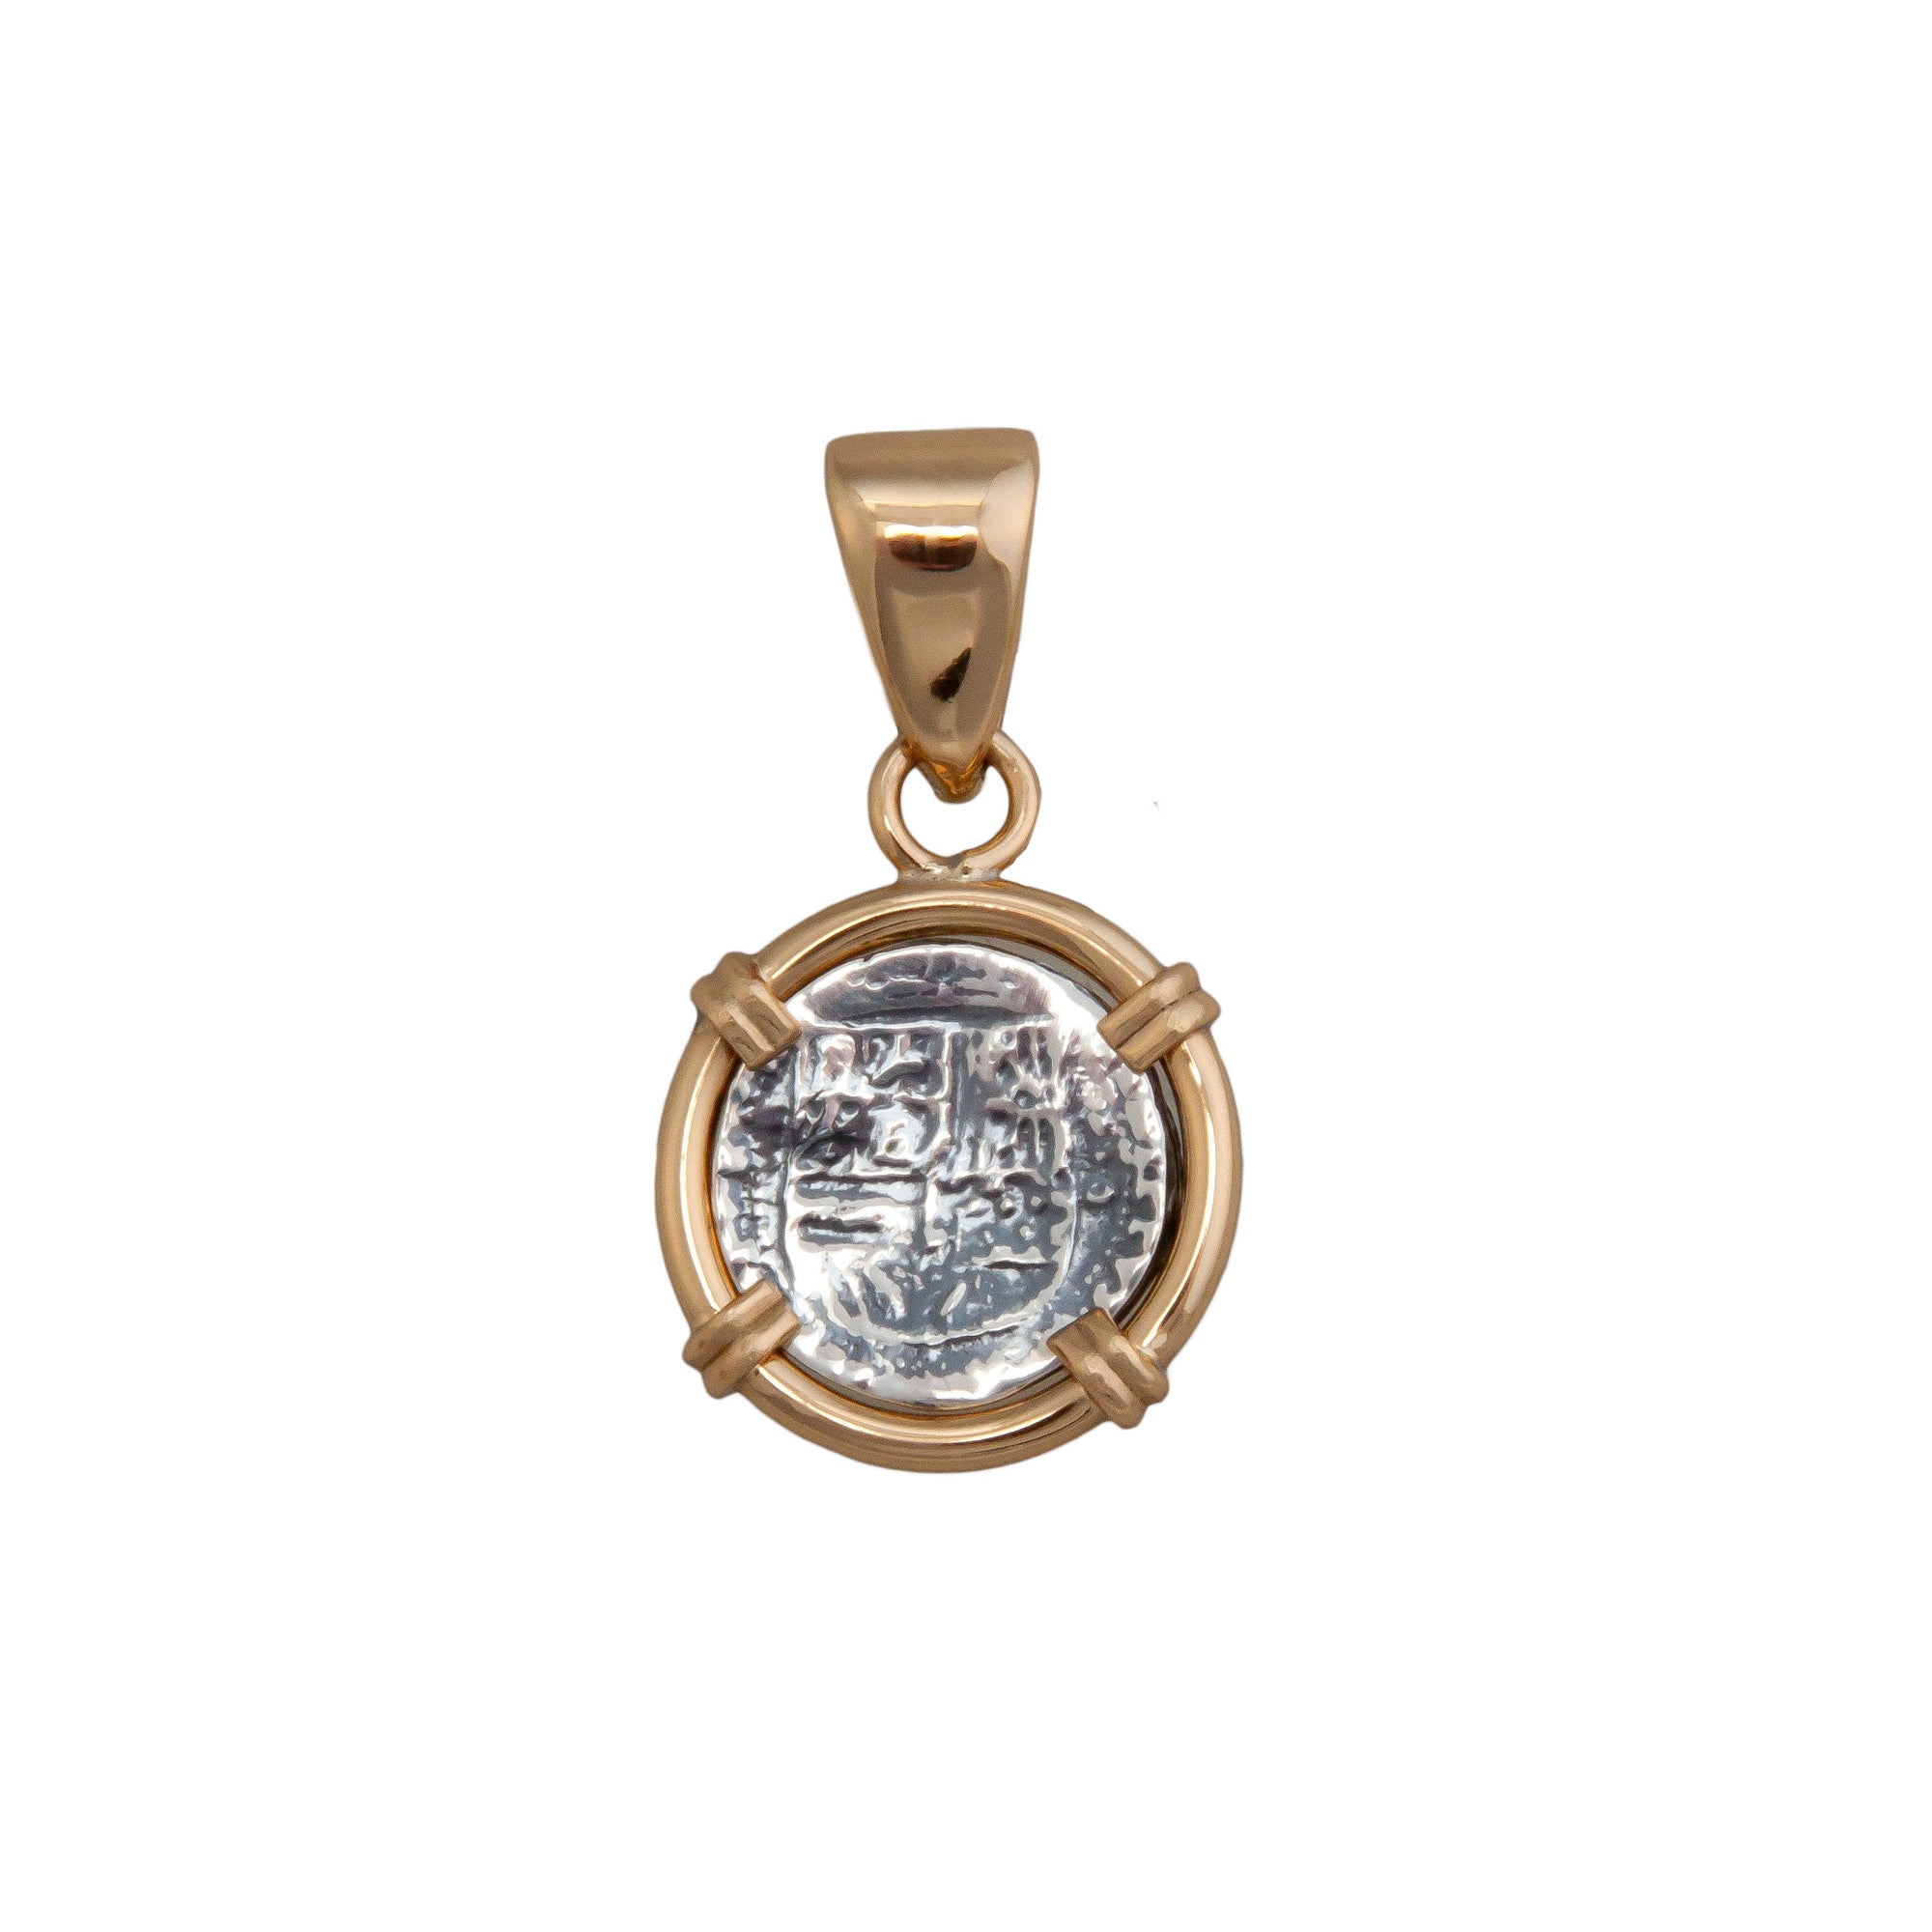 Sterling Silver and Alchemia Replica Spanish Reversible Coin Prong Pendant | Charles Albert Jewelry